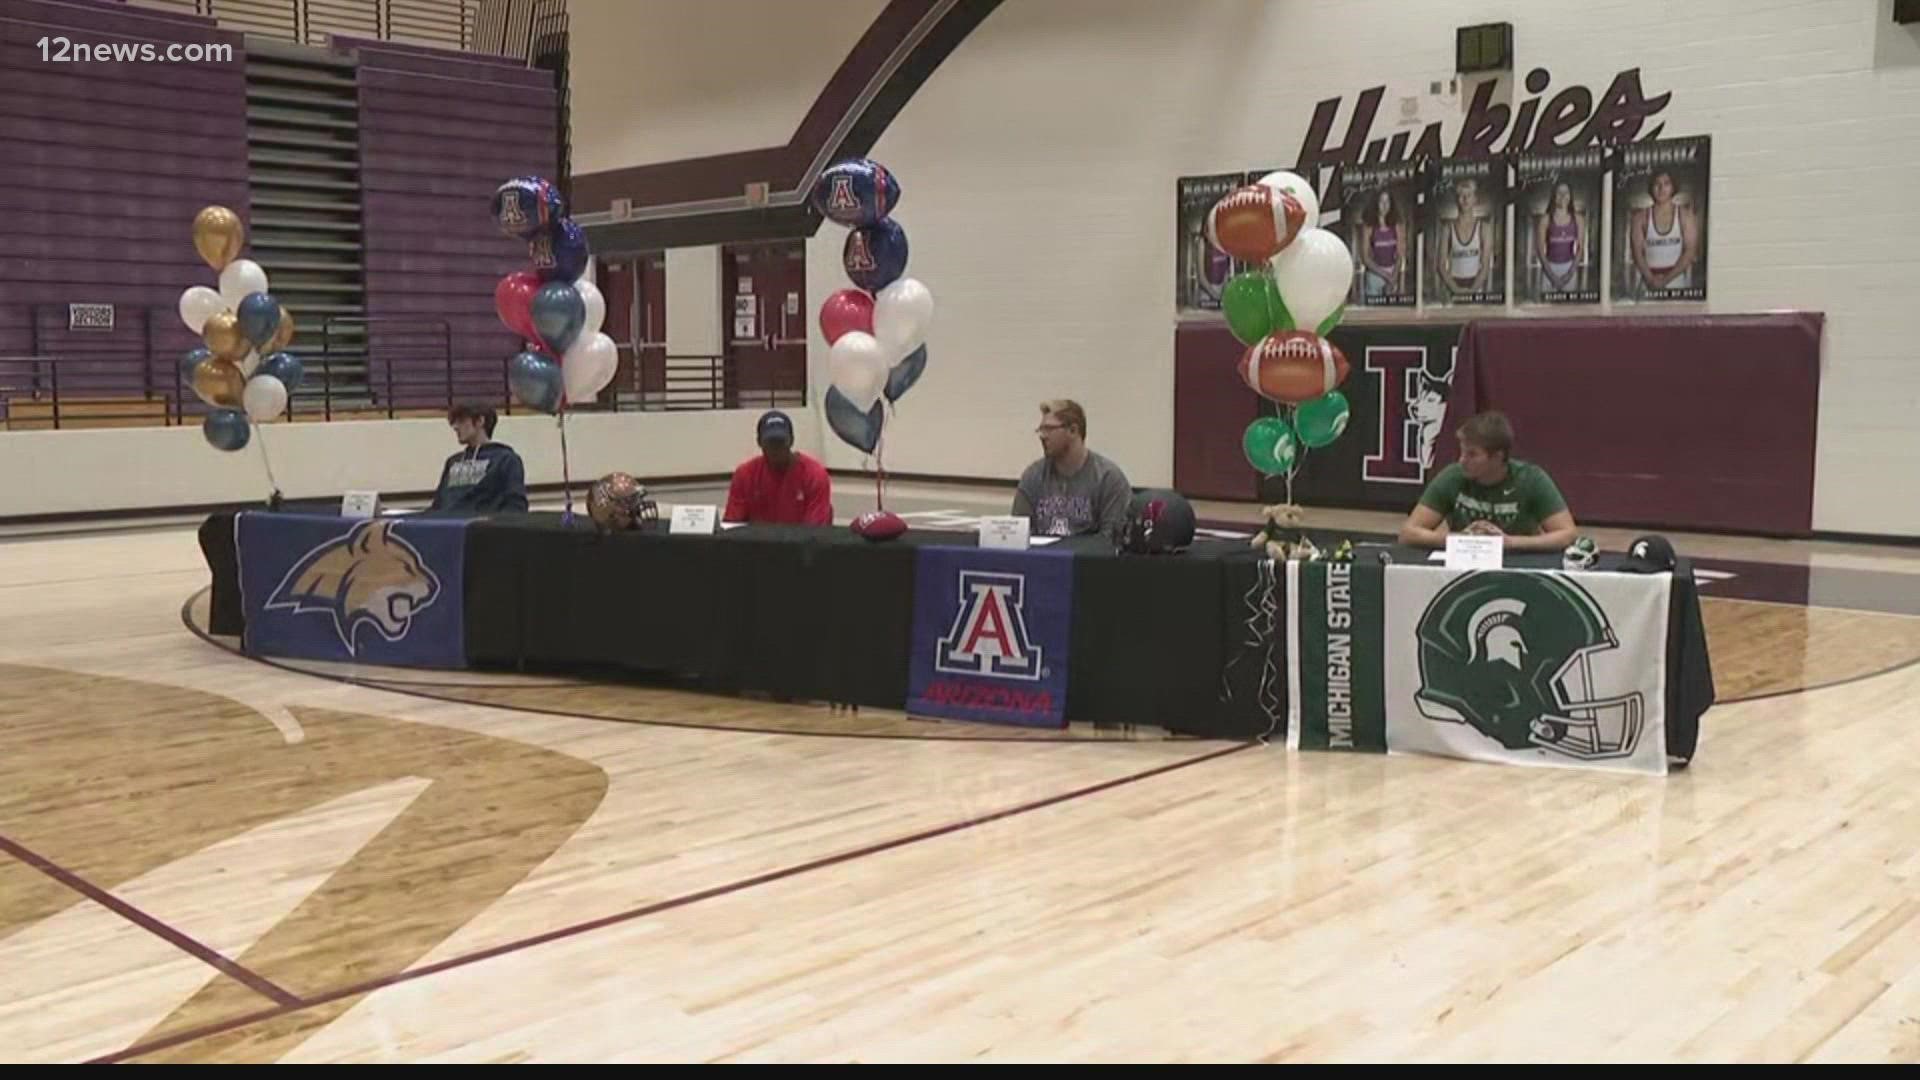 The early signing period for high school football players started on Wednesday. Many student-athletes across the Valley made their commitments official!